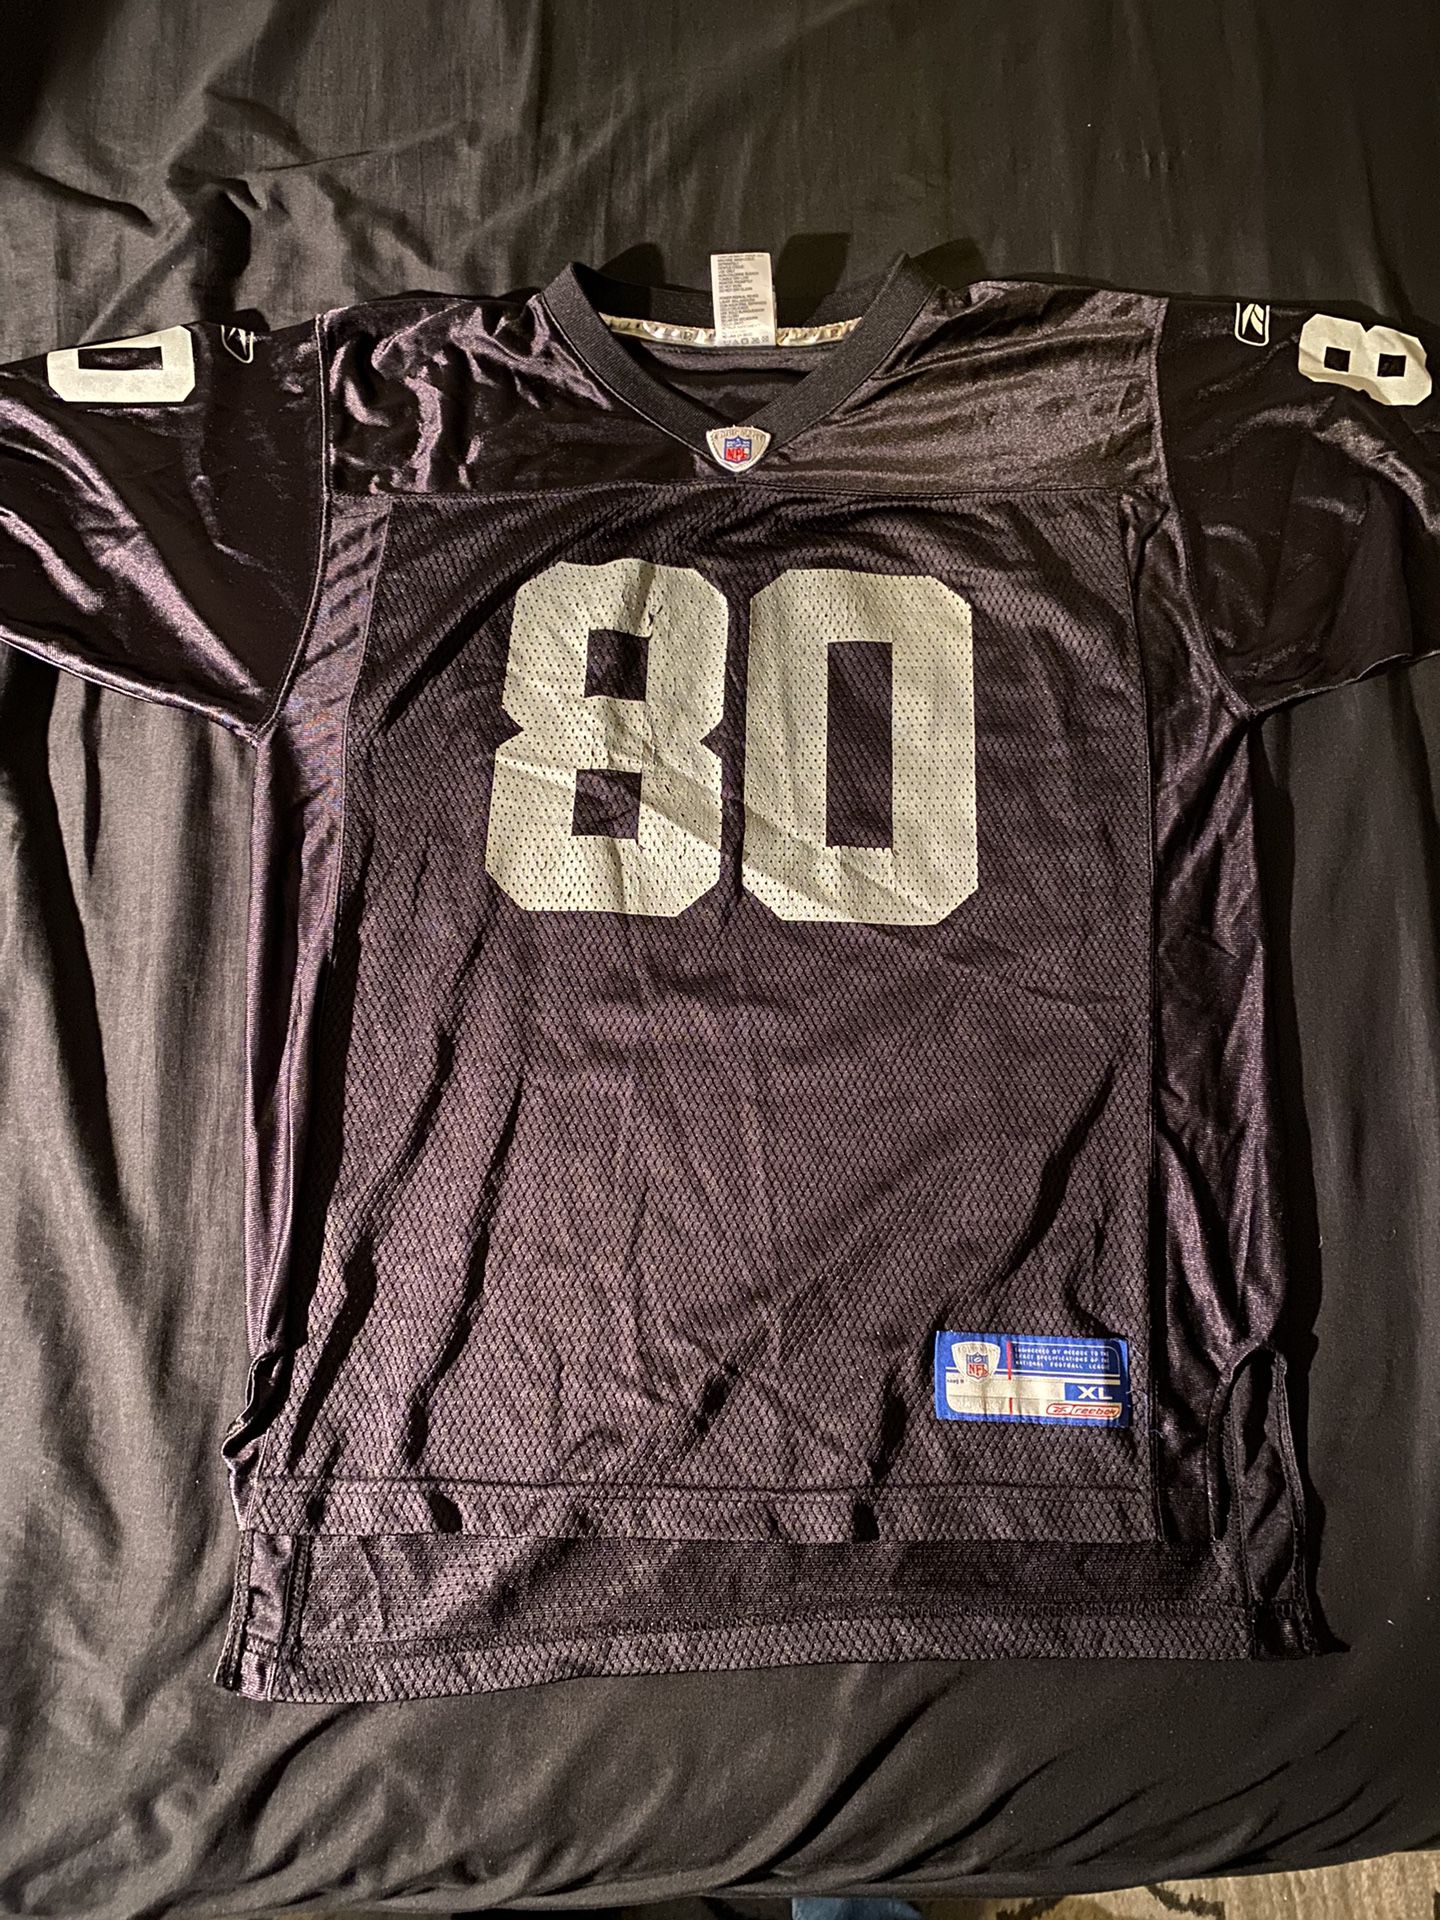 jerry rice jersey for sale